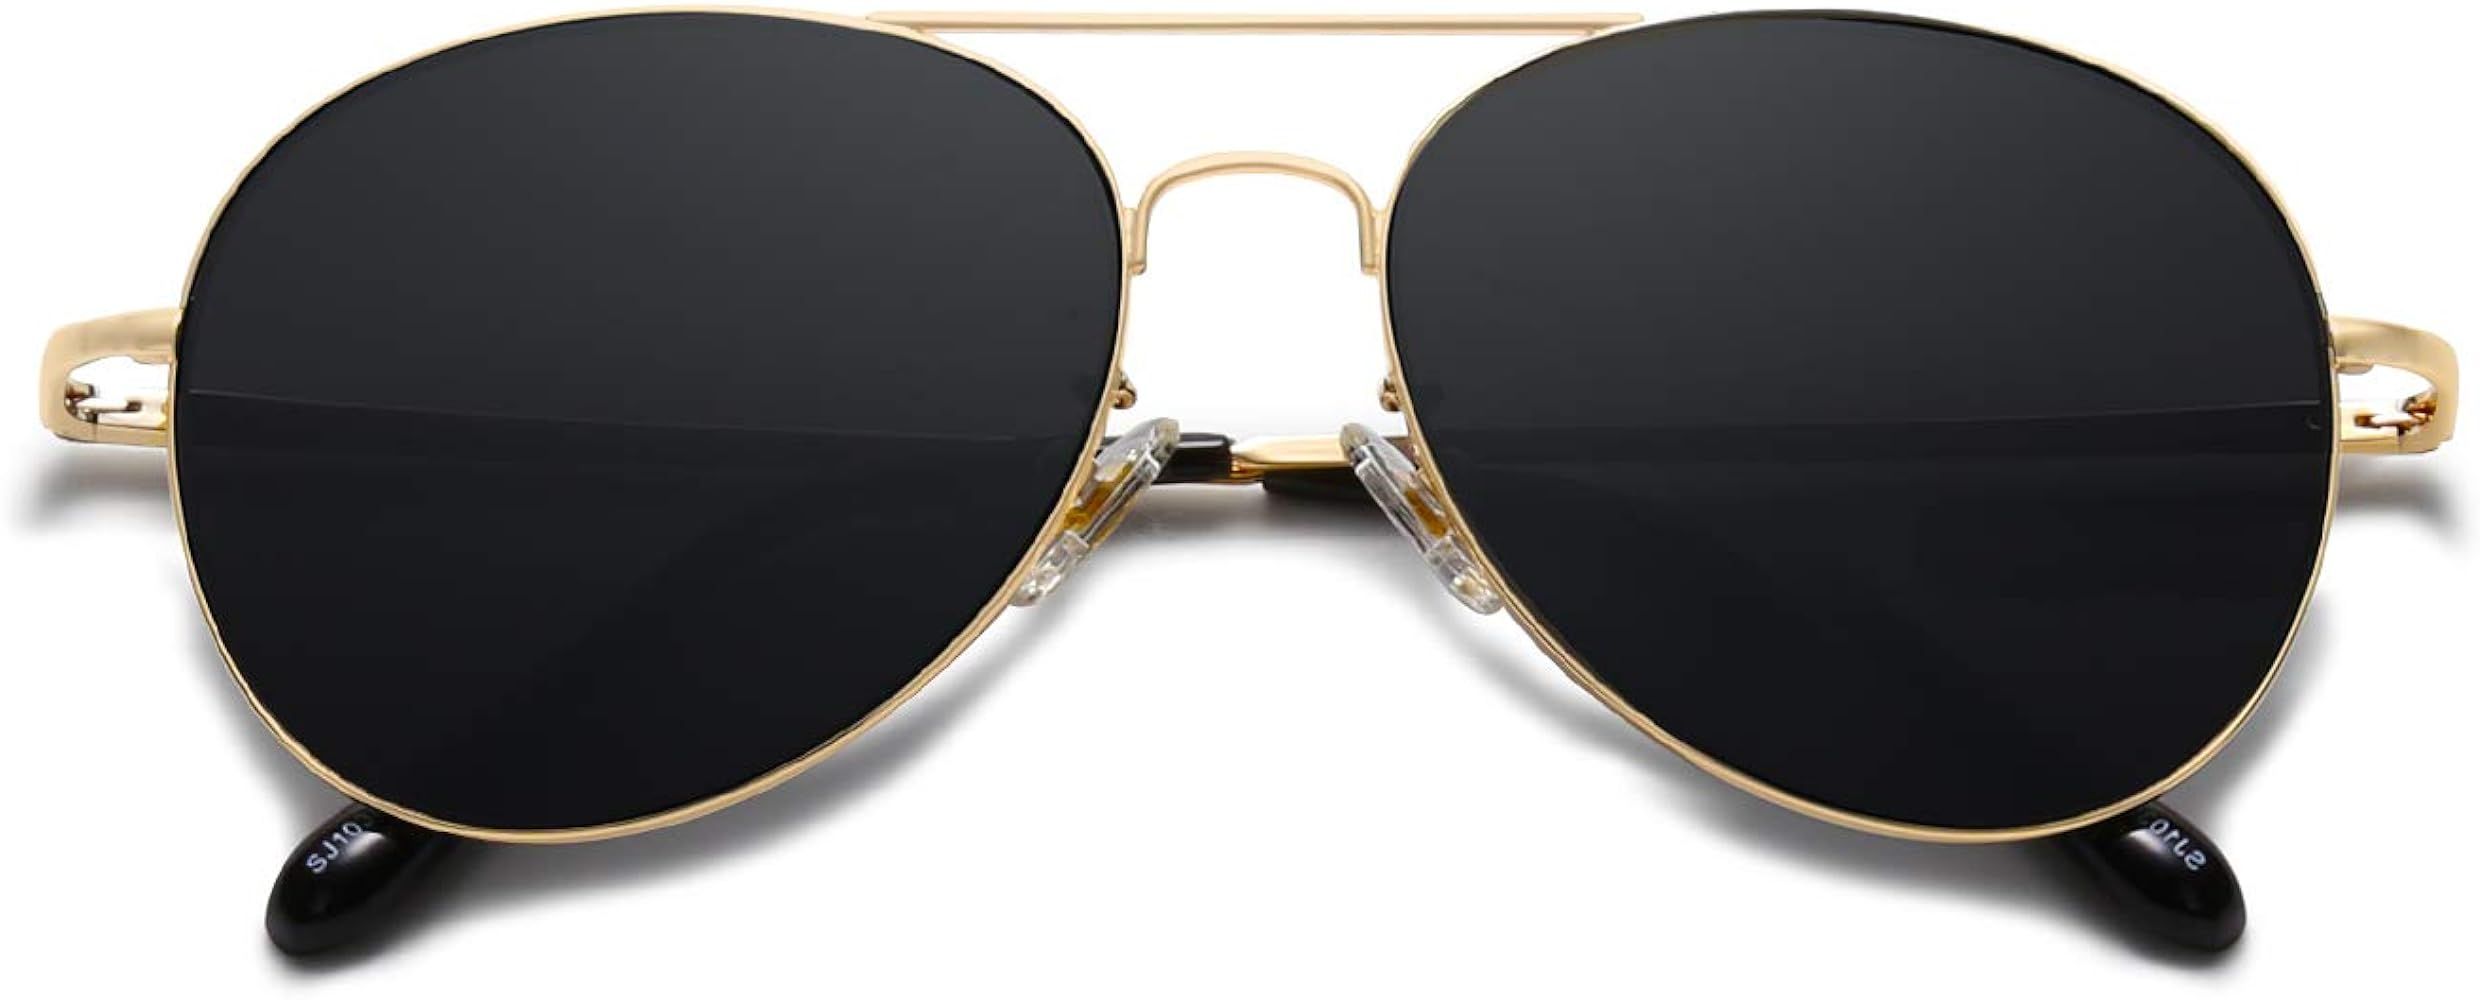 Classic Aviator Mirrored Flat Lens Sunglasses Metal Frame with Spring Hinges SJ1030 | Amazon (US)